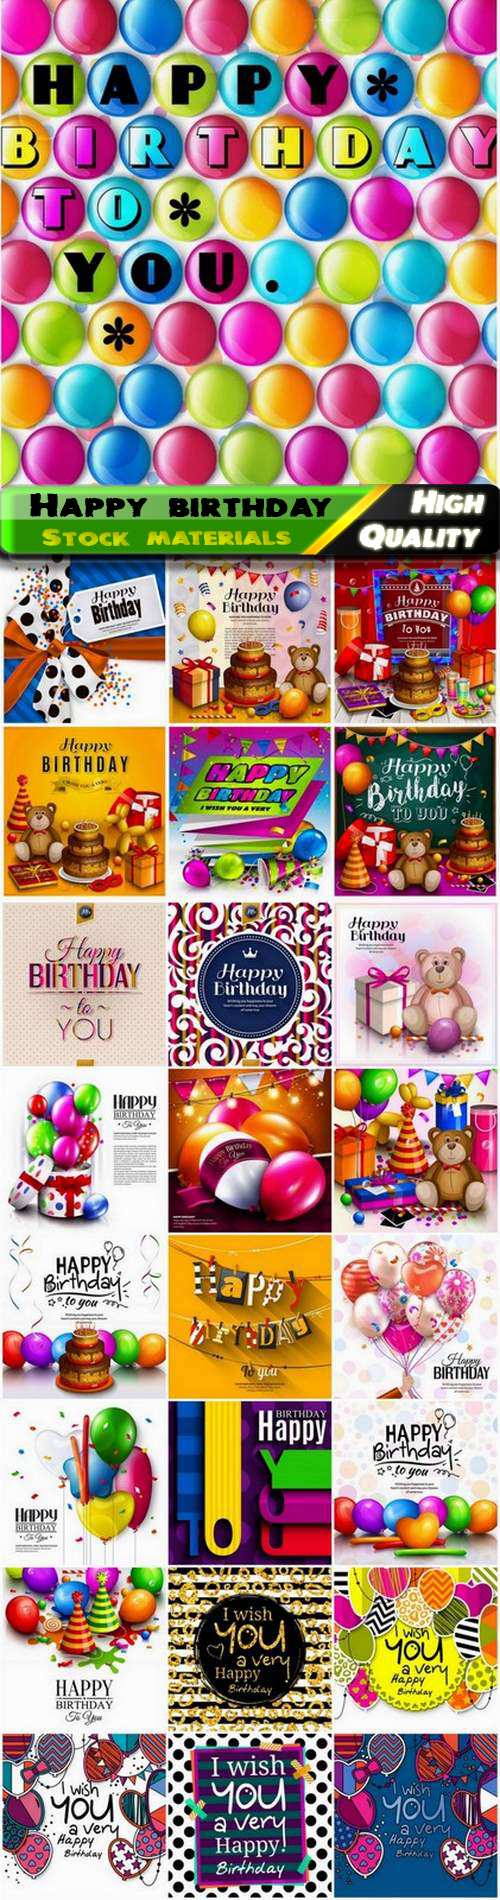 Greeting happy birthday card with balloon confetti cake gift 25 Eps